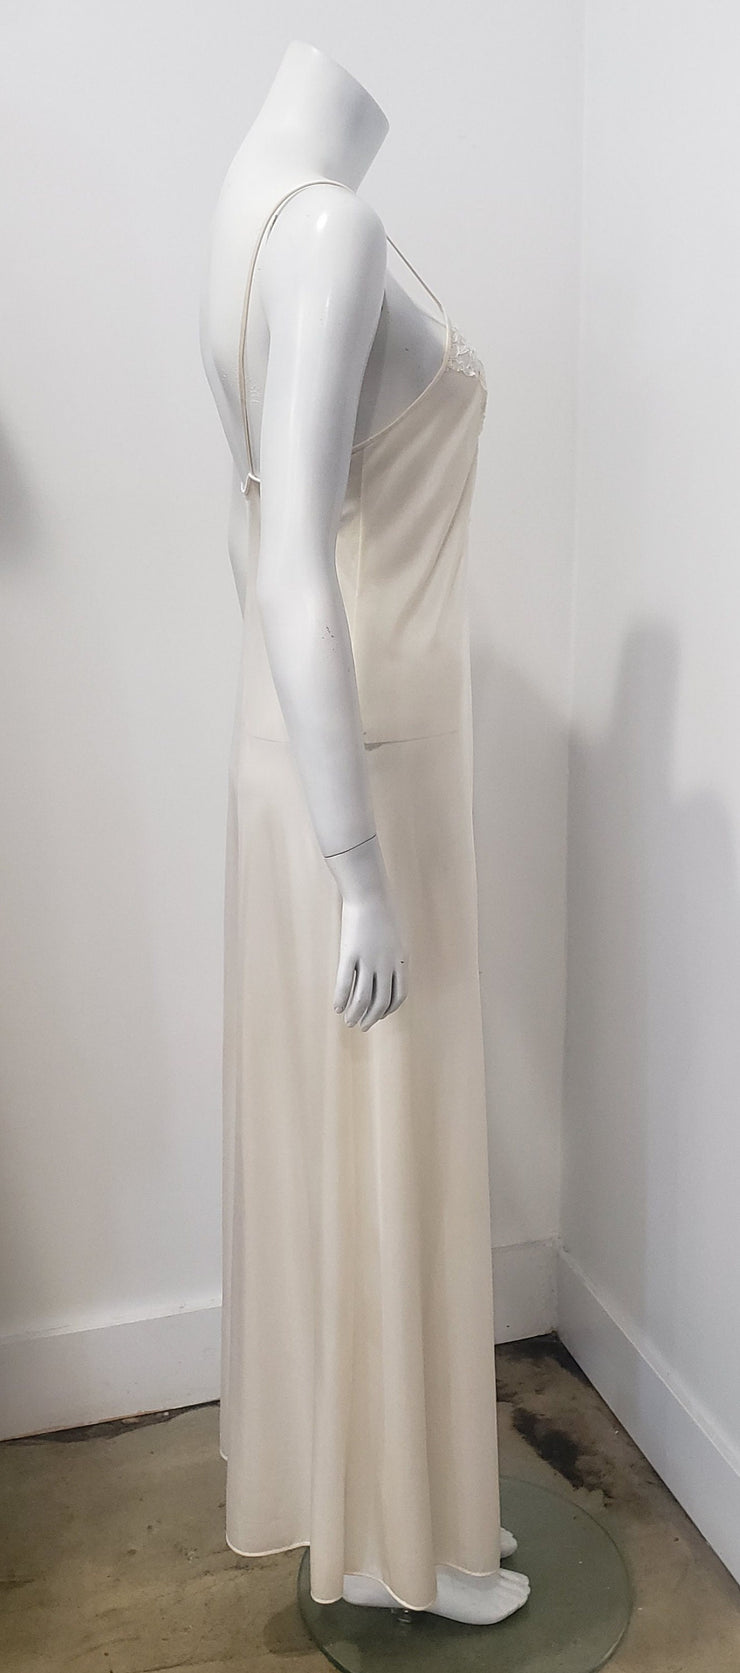 Vintage 70’s Hollywood Glam Romantic Wedding Lace Slit Maxi Nightgown